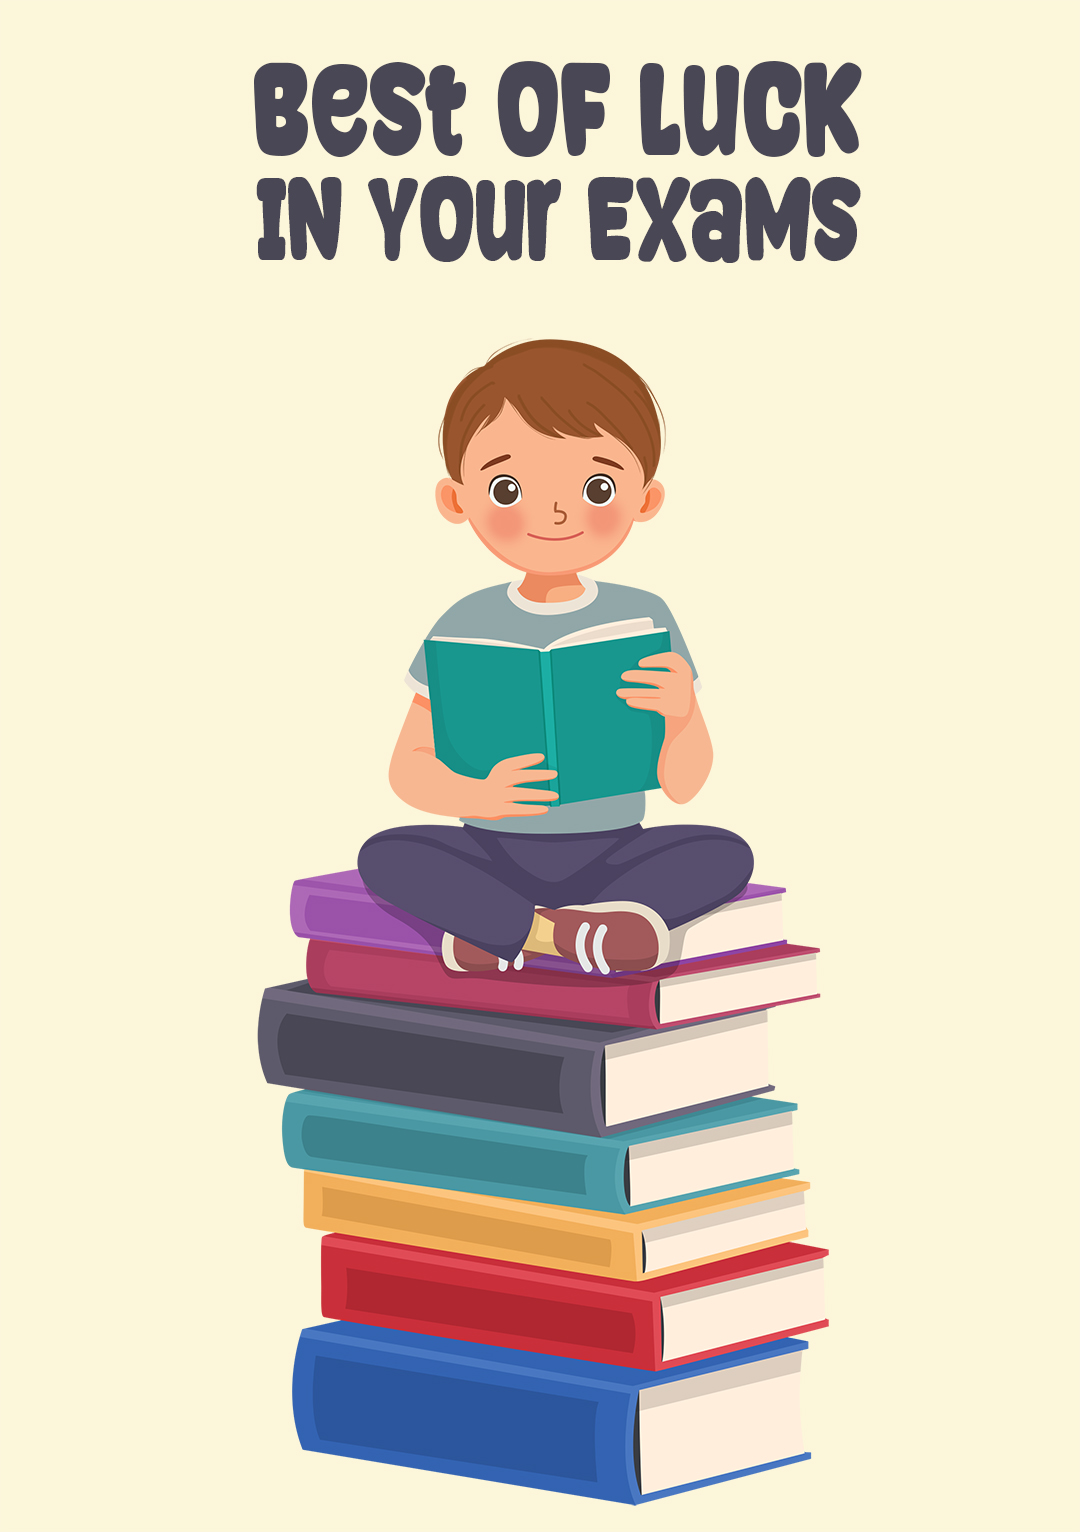 Best Of Luck In Your Exams - For Him Greeting Card